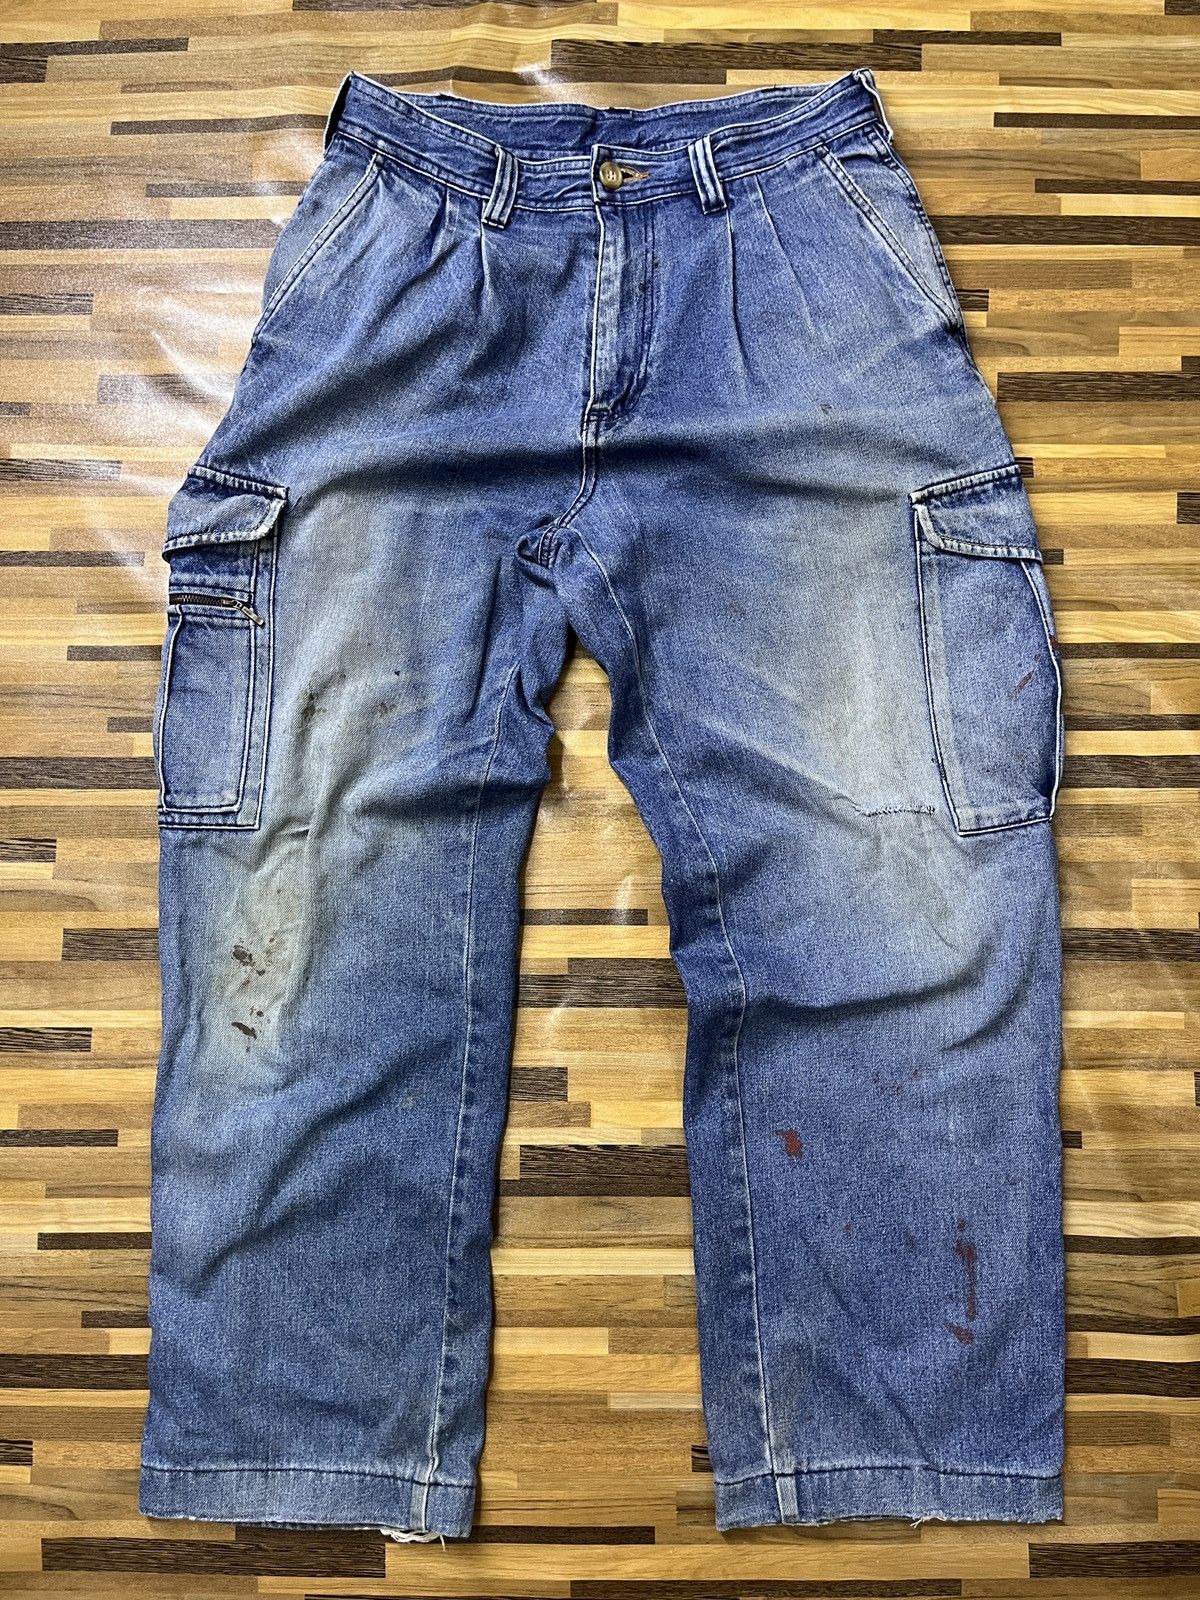 Distressed Denim - Worn Even River Japanese Cargo Denim Ripped Baggy Style - 19